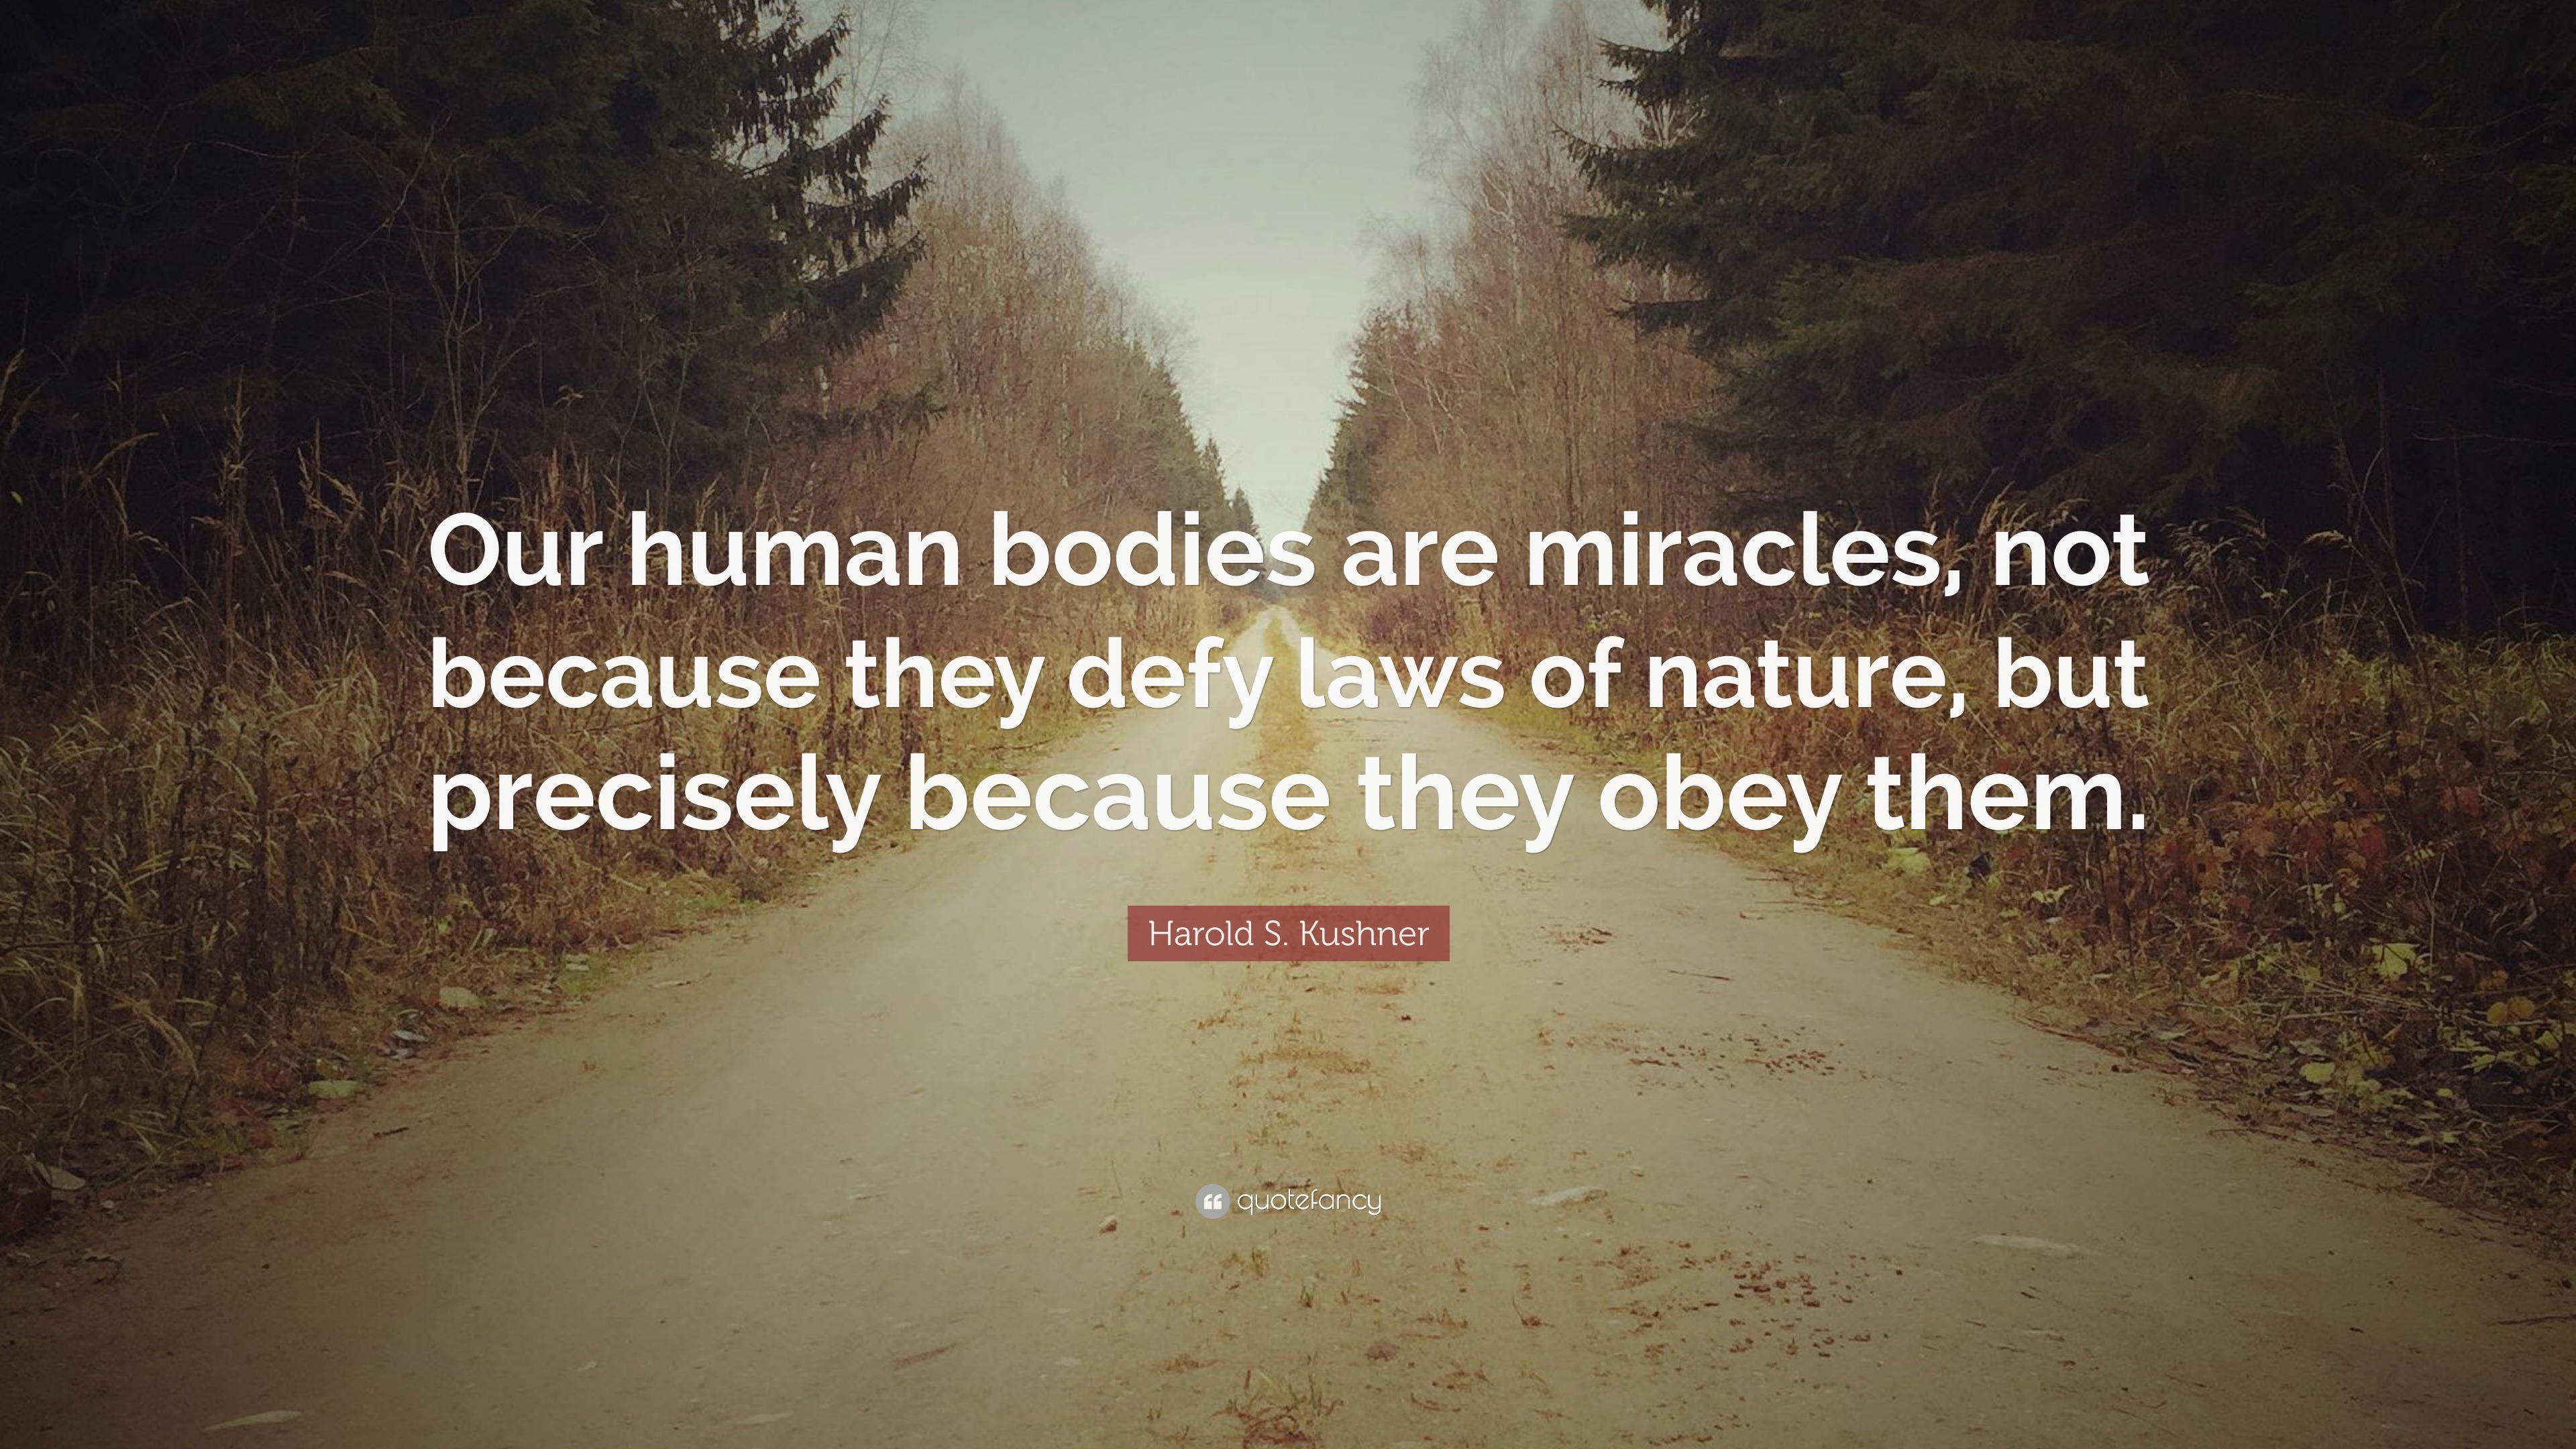 Harold S Kushner Quote “our Human Bodies Are Miracles Not Because They Defy Laws Of Nature